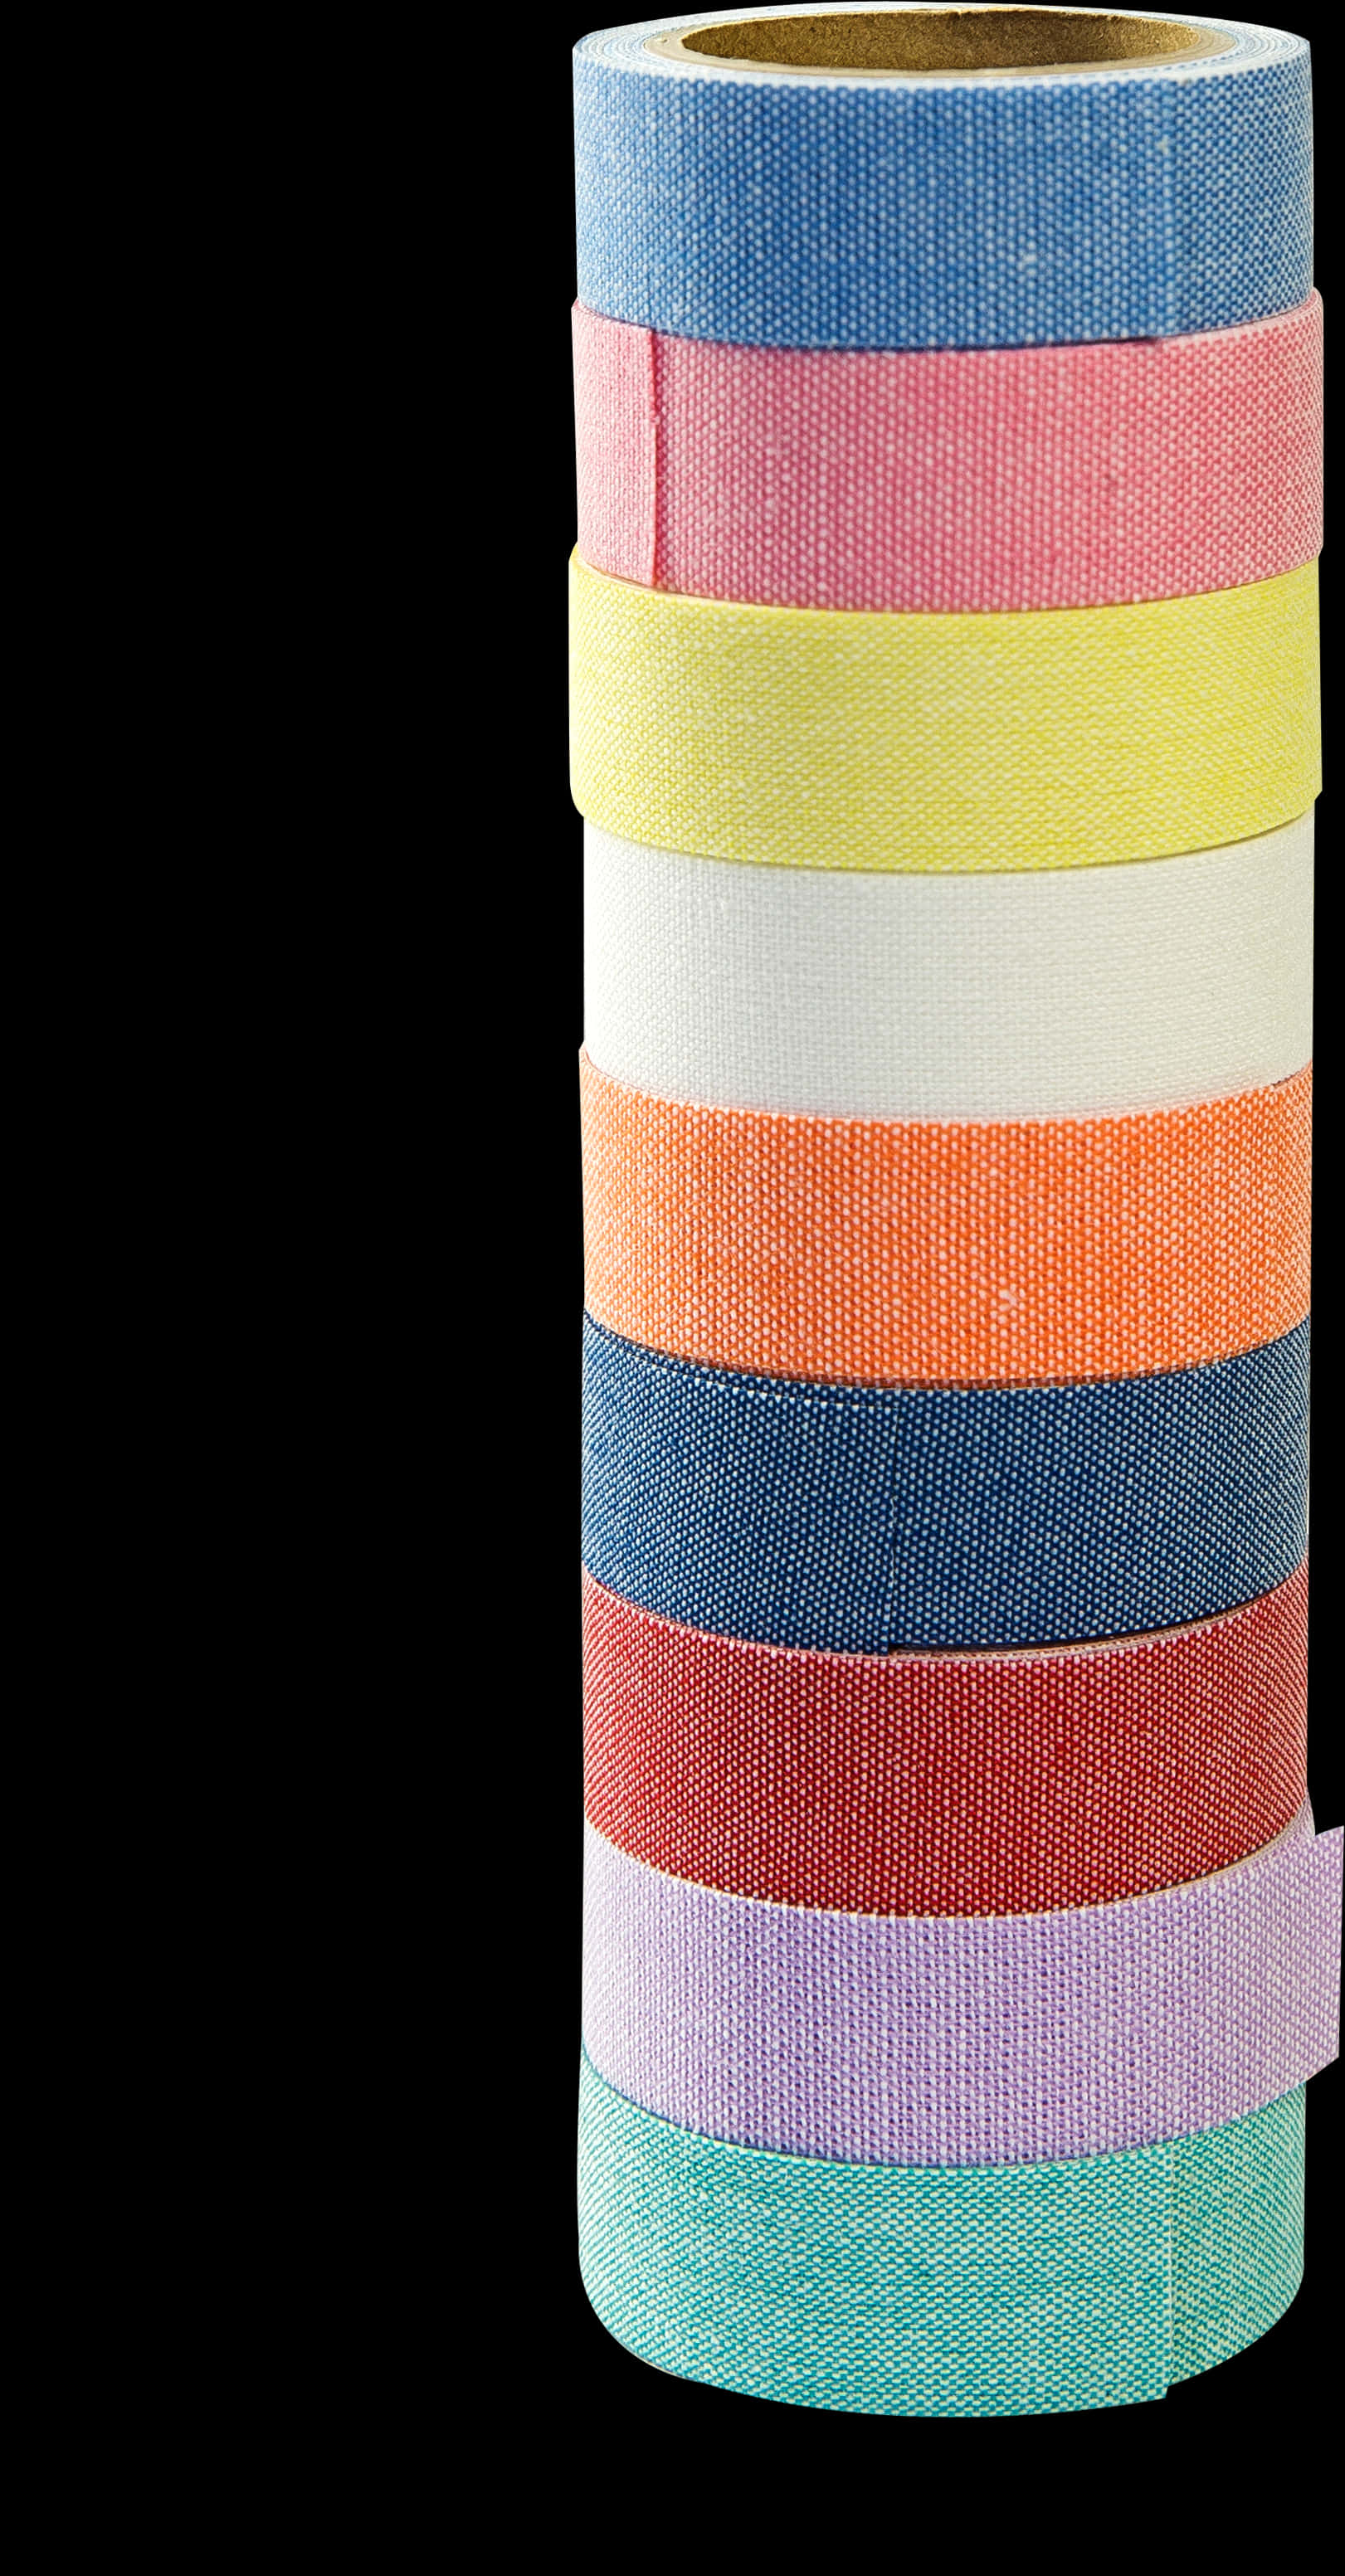 A Stack Of Colorful Rolls Of Tape